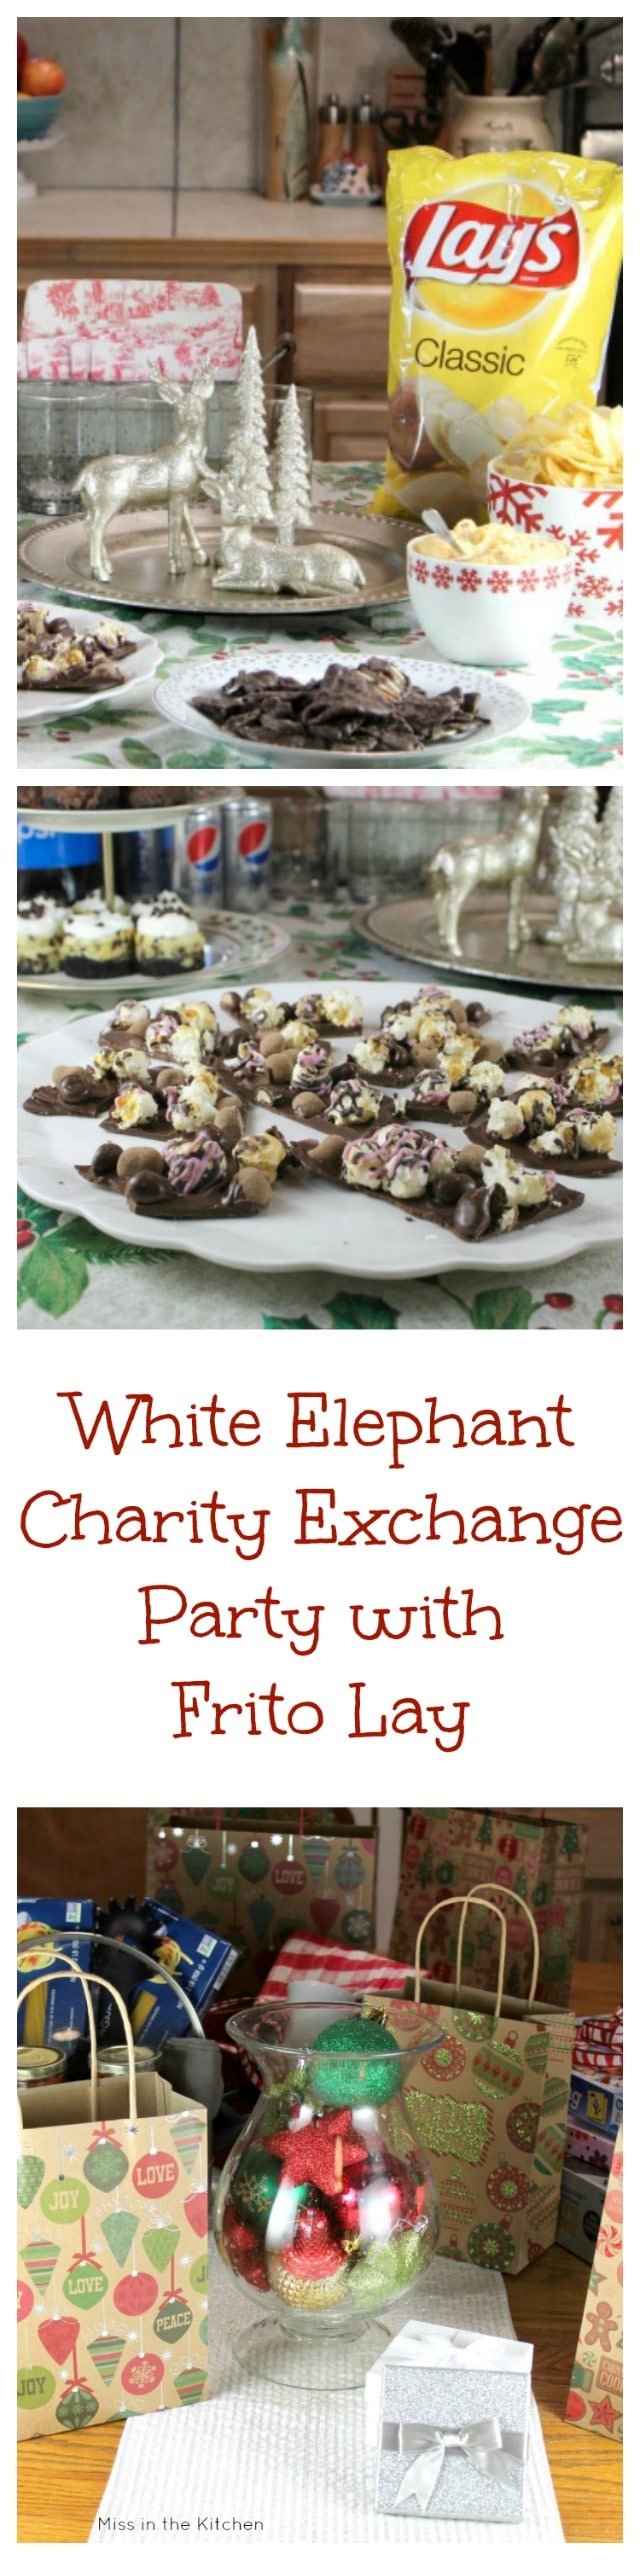 White Elephant Charity Exchange Party from MissintheKitchen with Frito Lay #ad